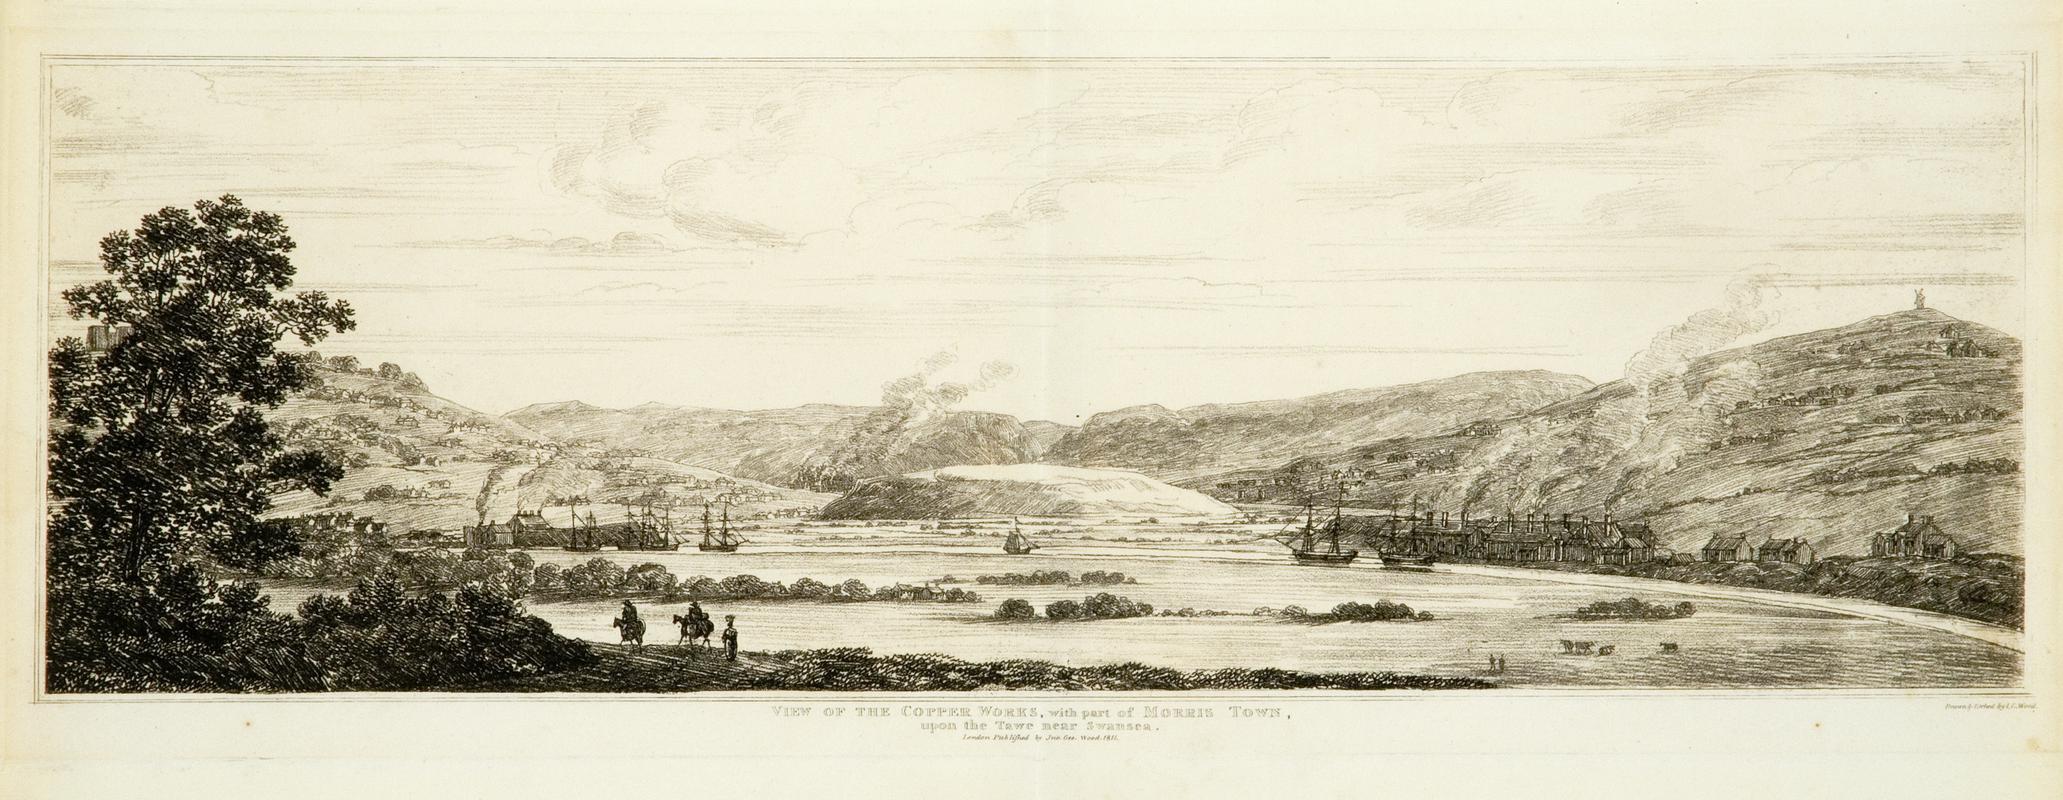 Engraving : Copper Works at Morriston